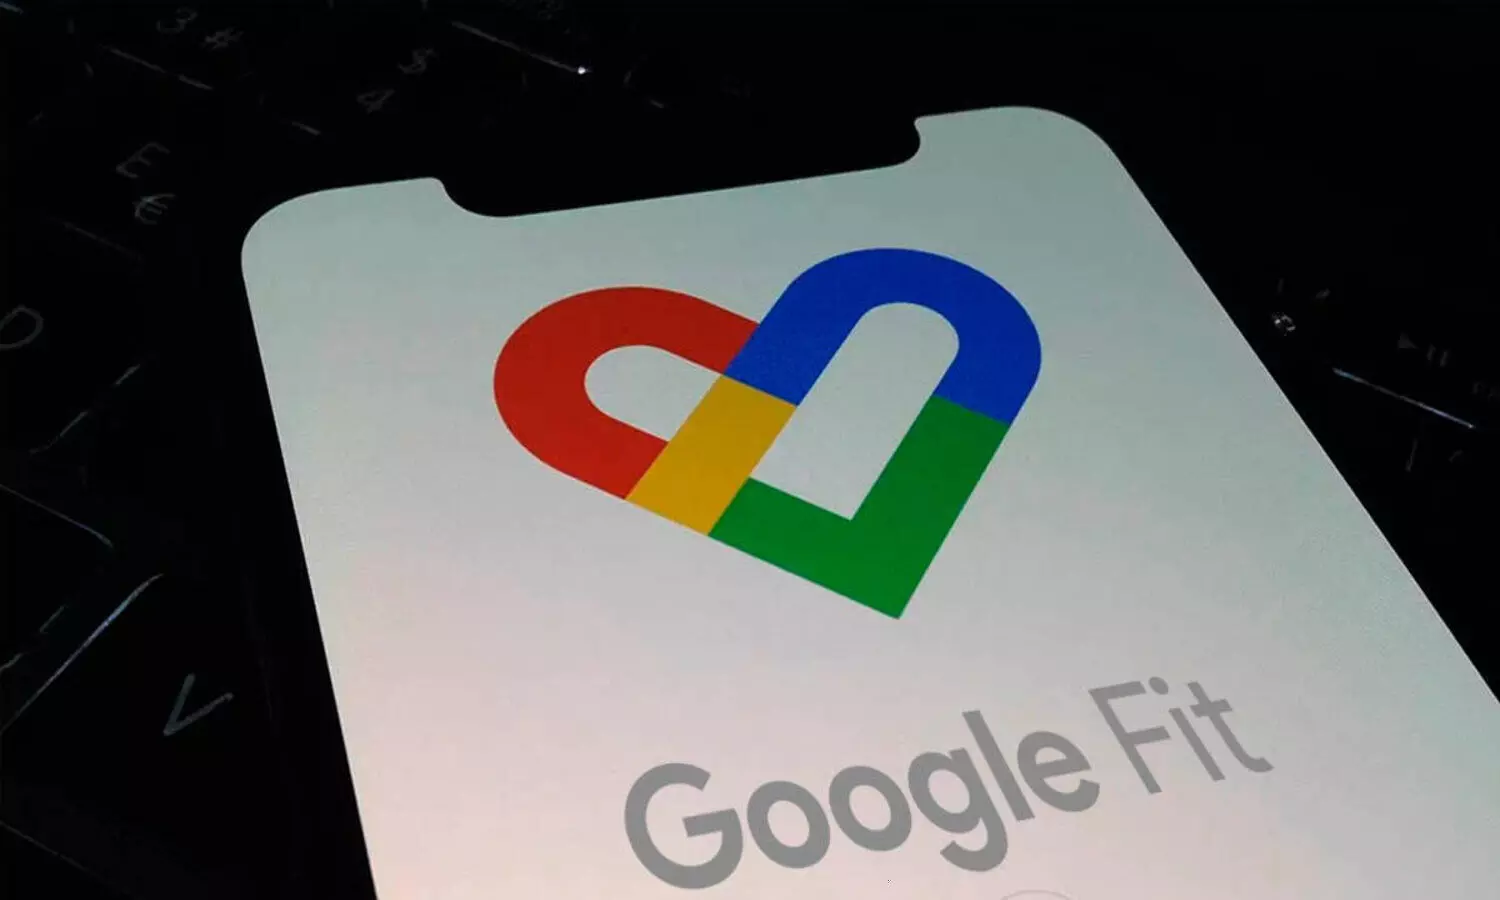 google fit New feature